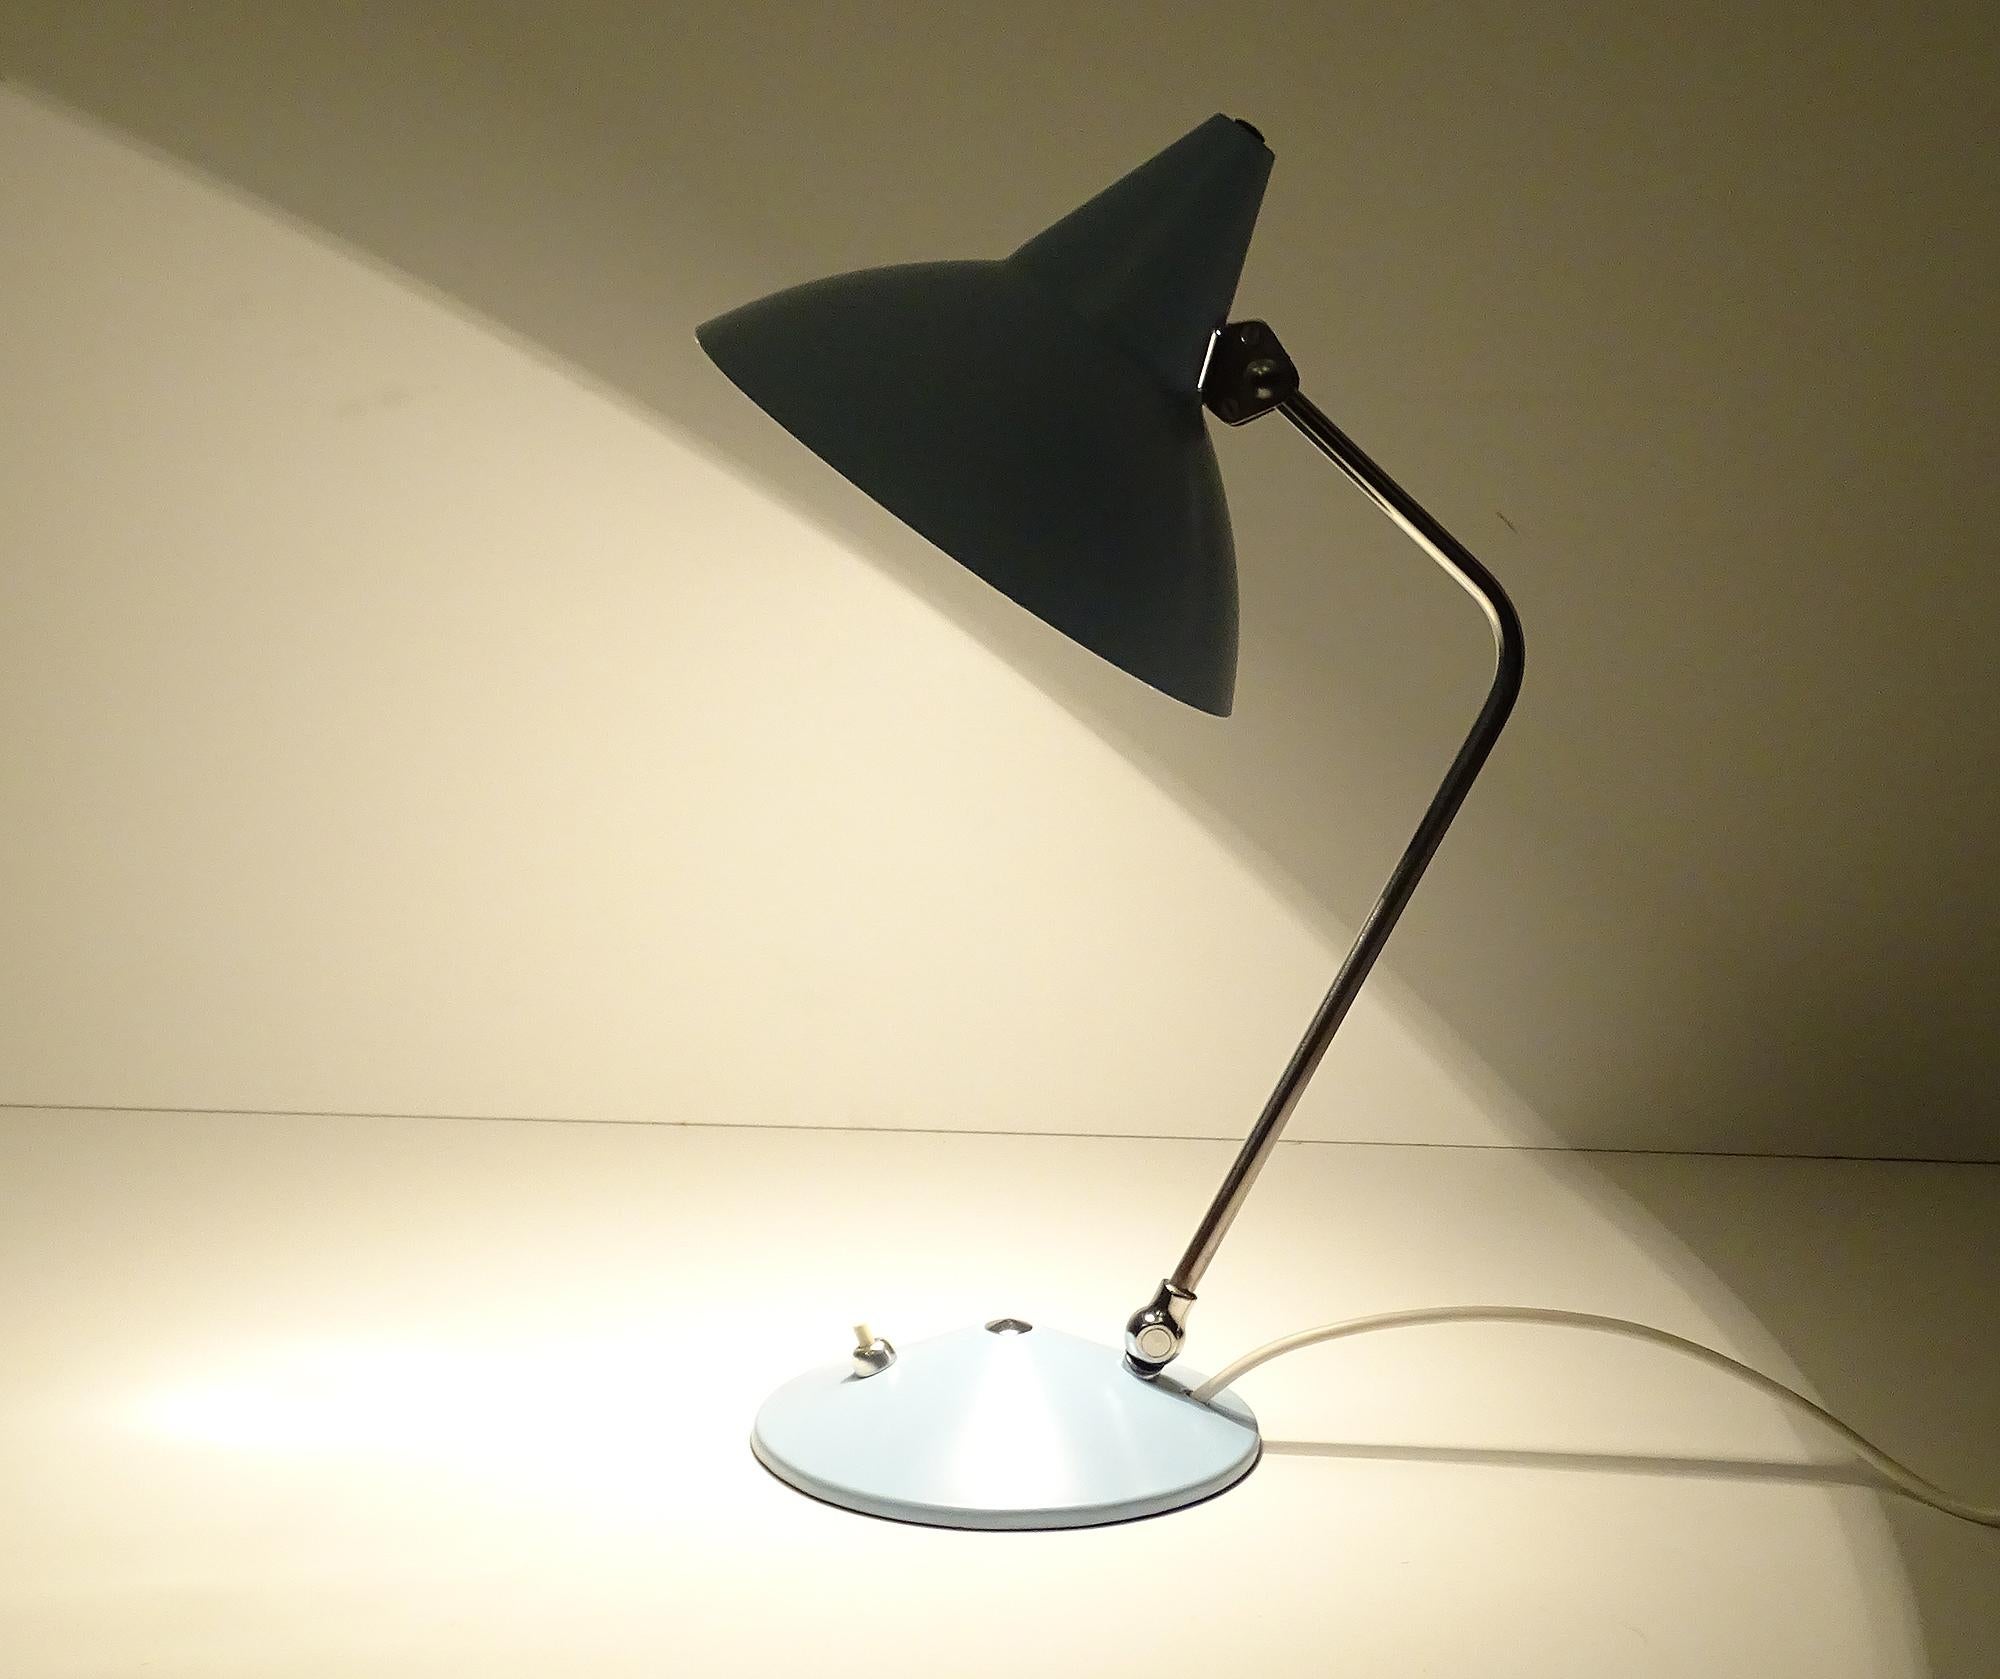 Midcentury table / desk lamp by Helo with signature witch Hat cap, the stem and shade´s angle are both adjustable, pastel blue enameled shade and base, chromed stem
Rewired and ready for use in any country of the world. 
It comes with a standard